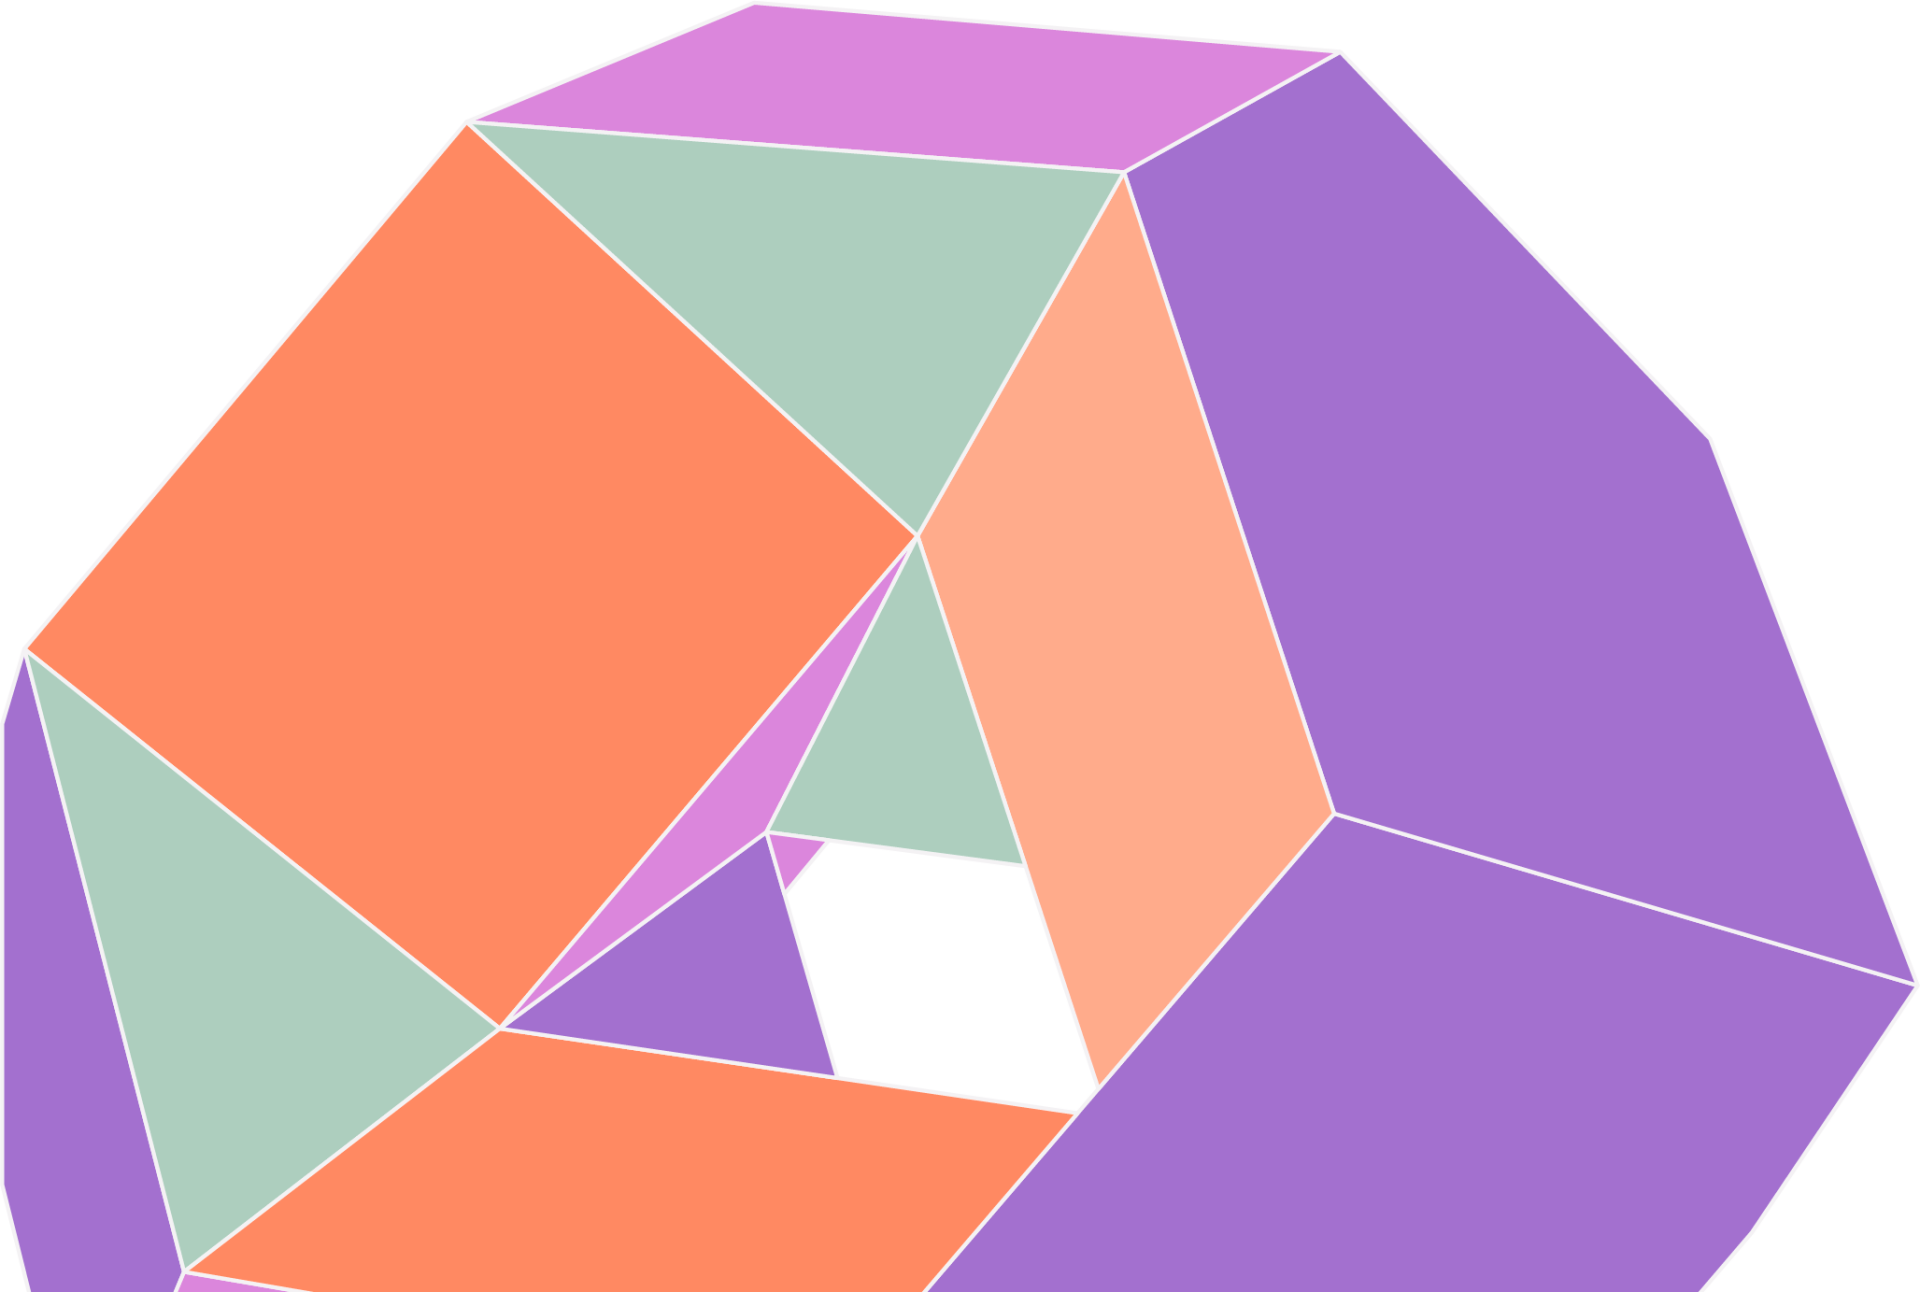 A purple and orange geometric shape with a hole in the middle